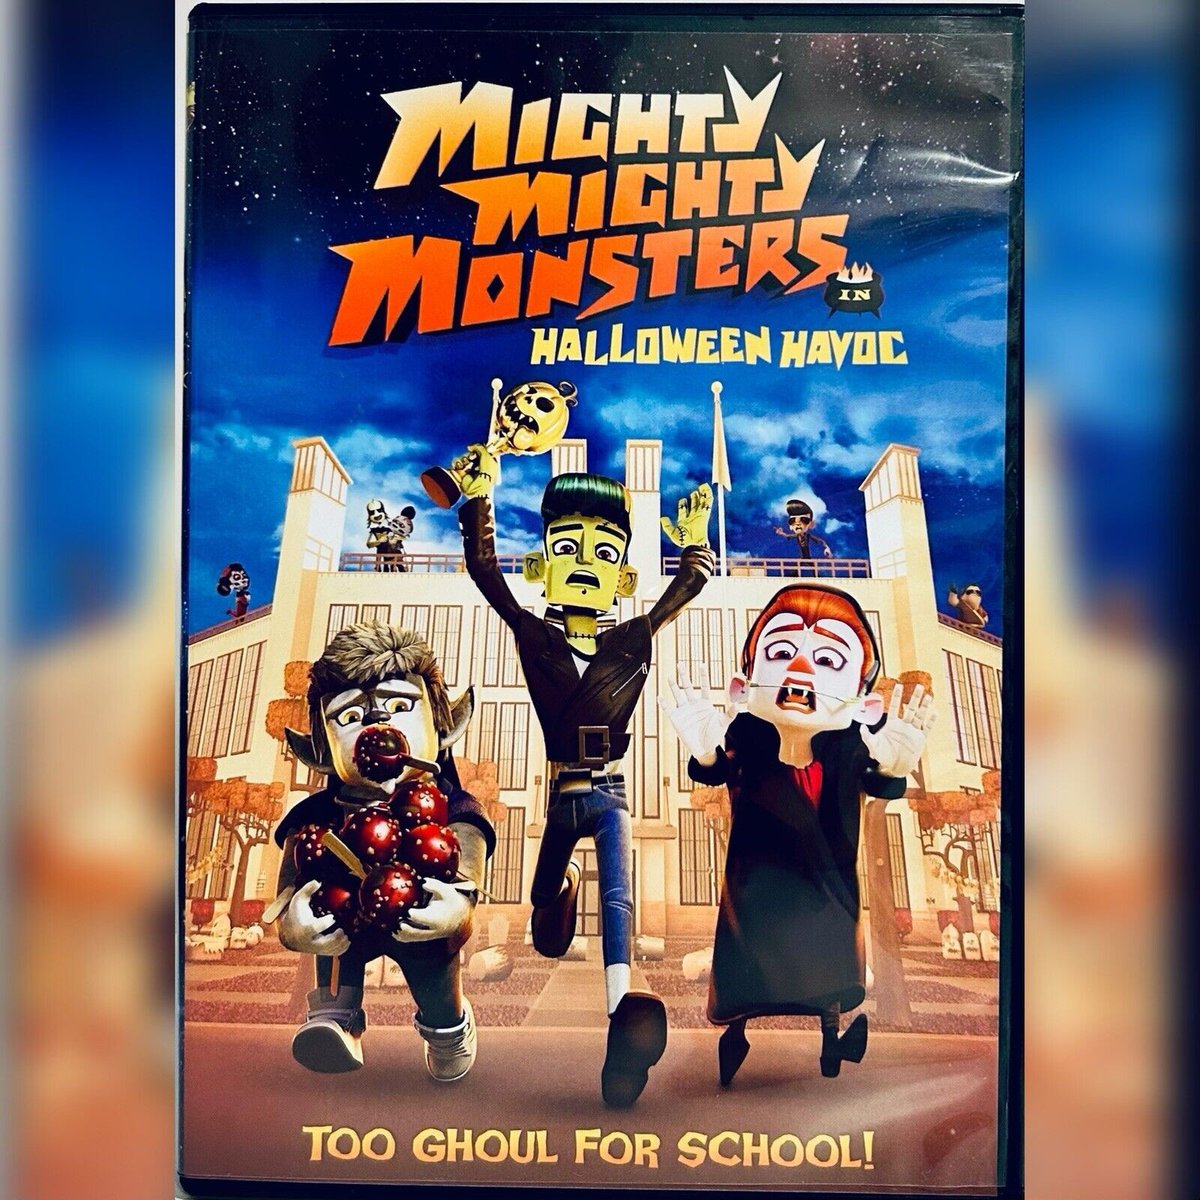 #NewArrival! Mighty Mighty Monsters Halloween Havoc (DVD 2013) Animation/Horror eOne TV Movie rareflicksplus.com/product-page/m… #checkitout #MightyMightyMonsters #Halloween #HalloweenHavoc #Animation #Animated #Cartoons #Horror #eOne #TVMovie #HorrorCommunity #DVD #DVDs #PhysicalMedia